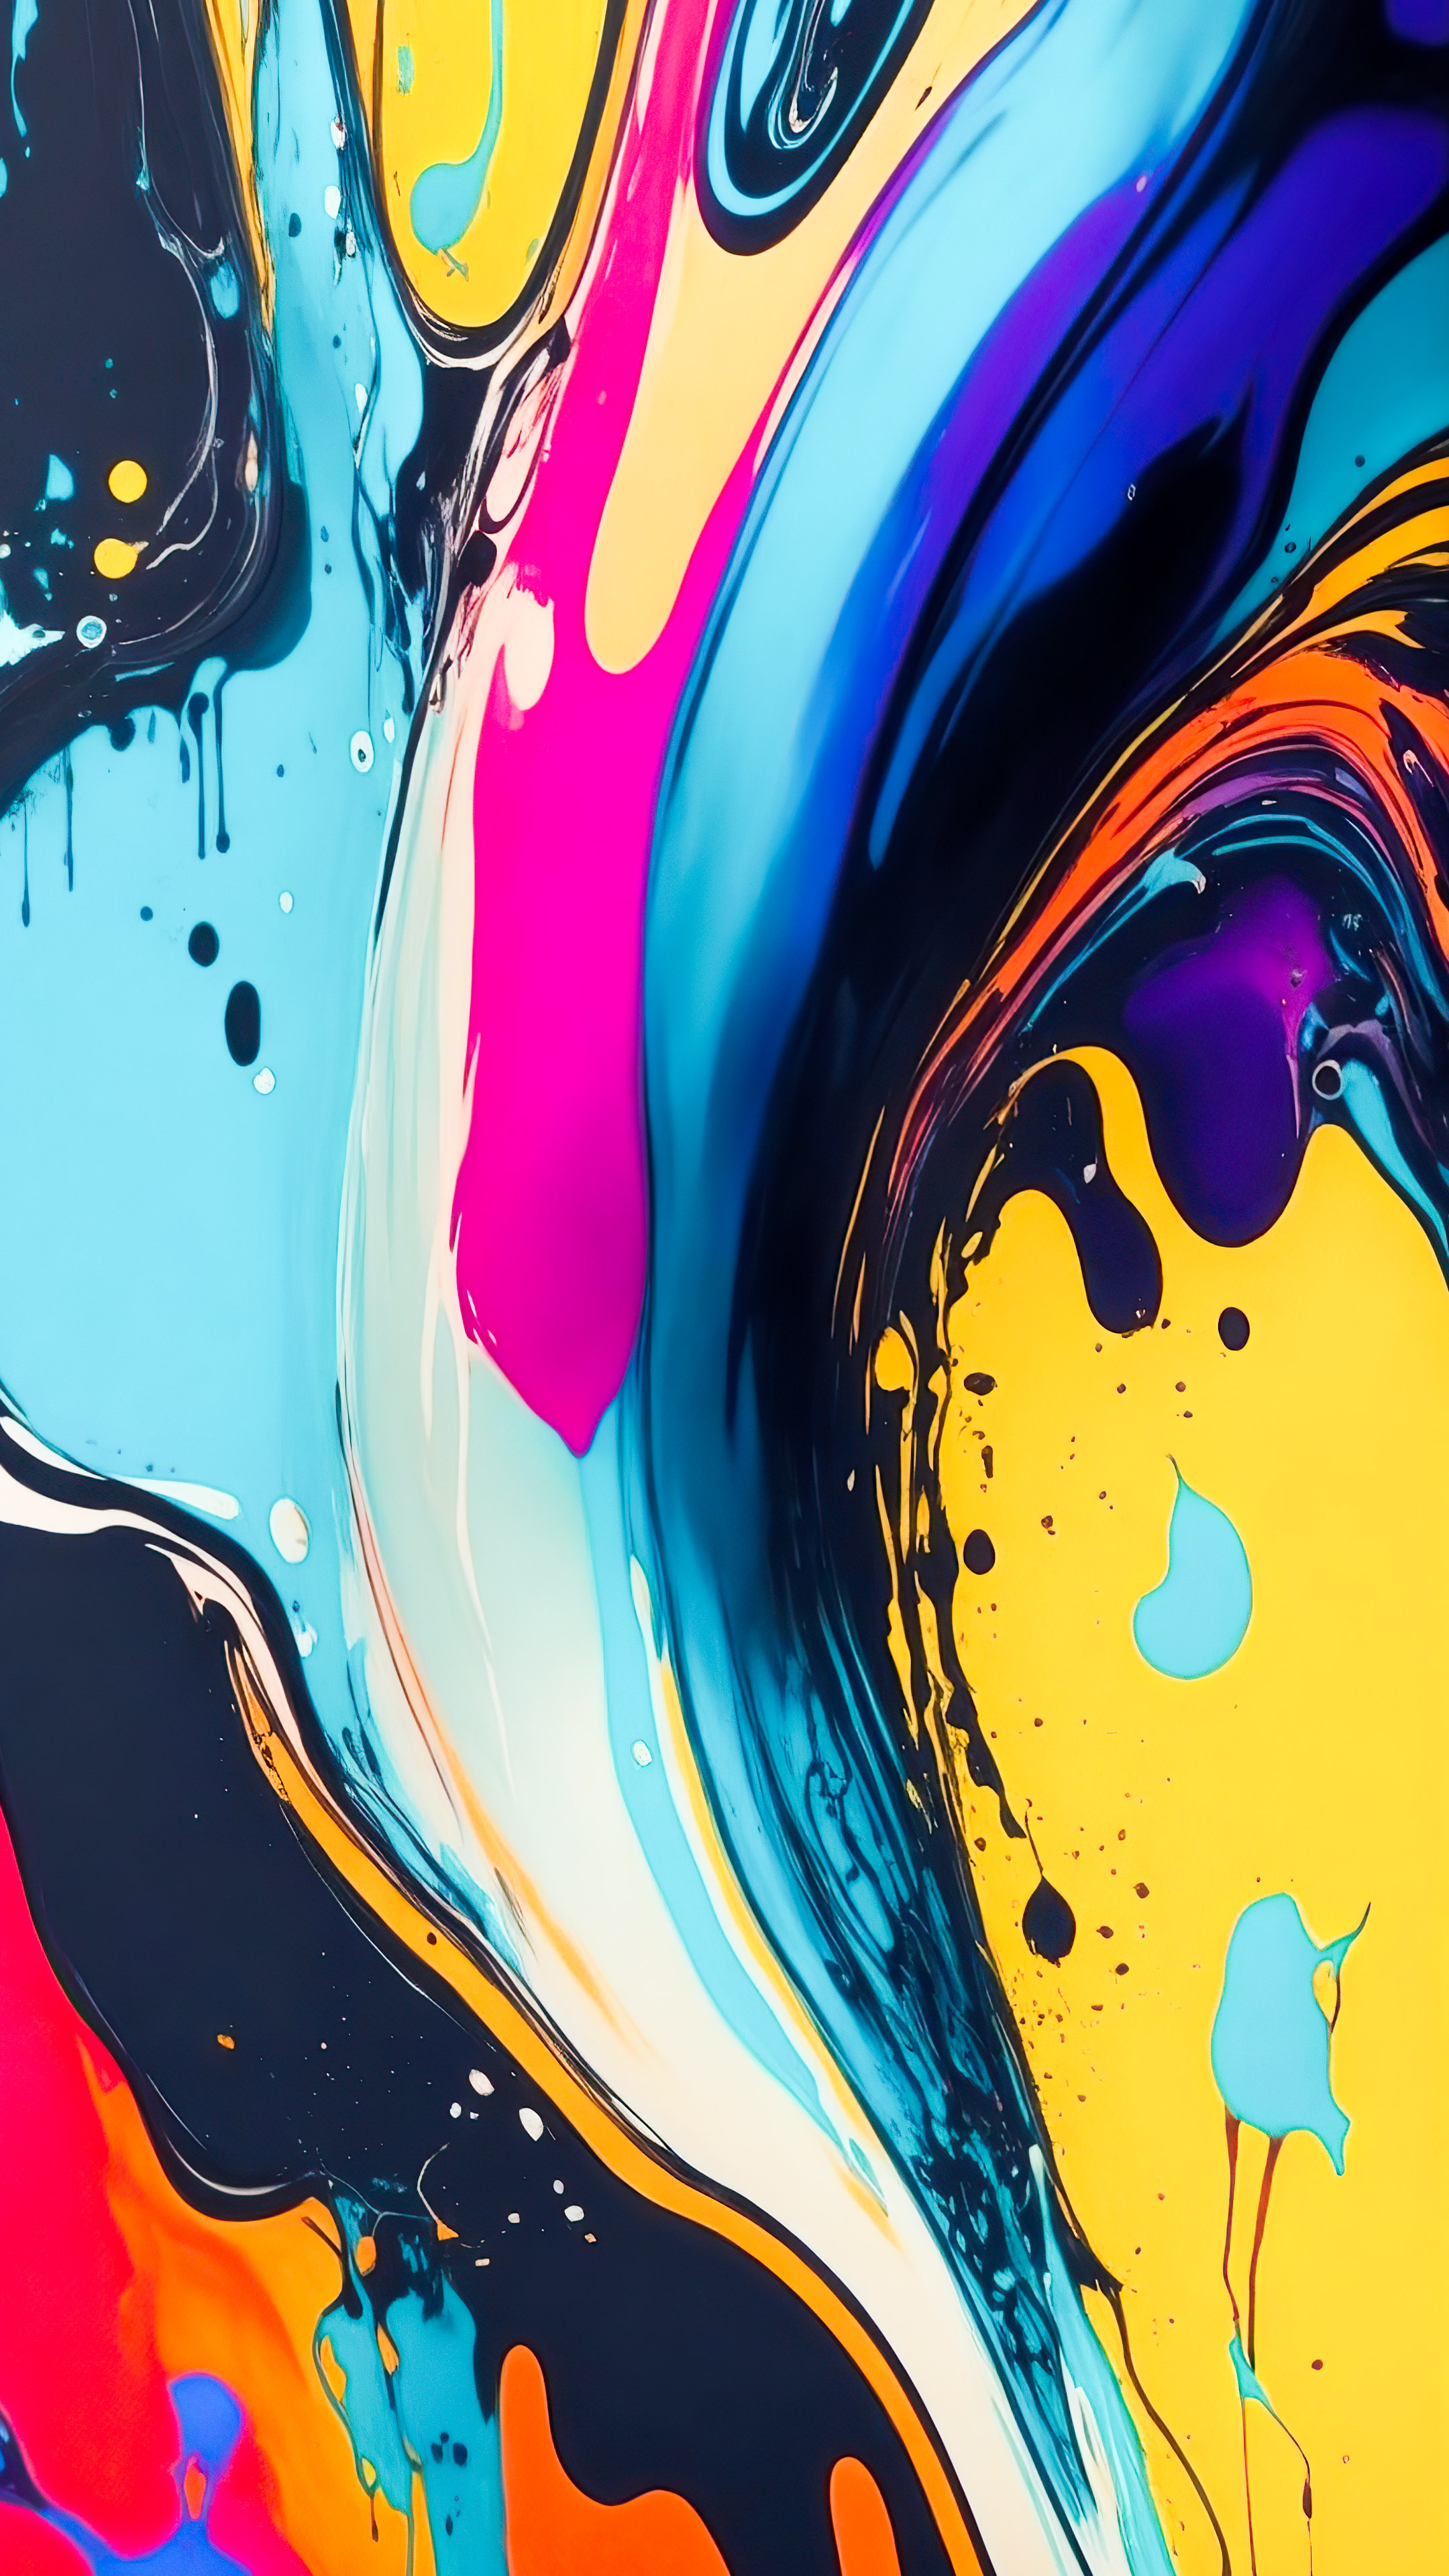 Enhance your iPhone's visual appeal with ultra HD abstract wallpaper 4K, showcasing rhythmic and chaotic drips of paint on a canvas.